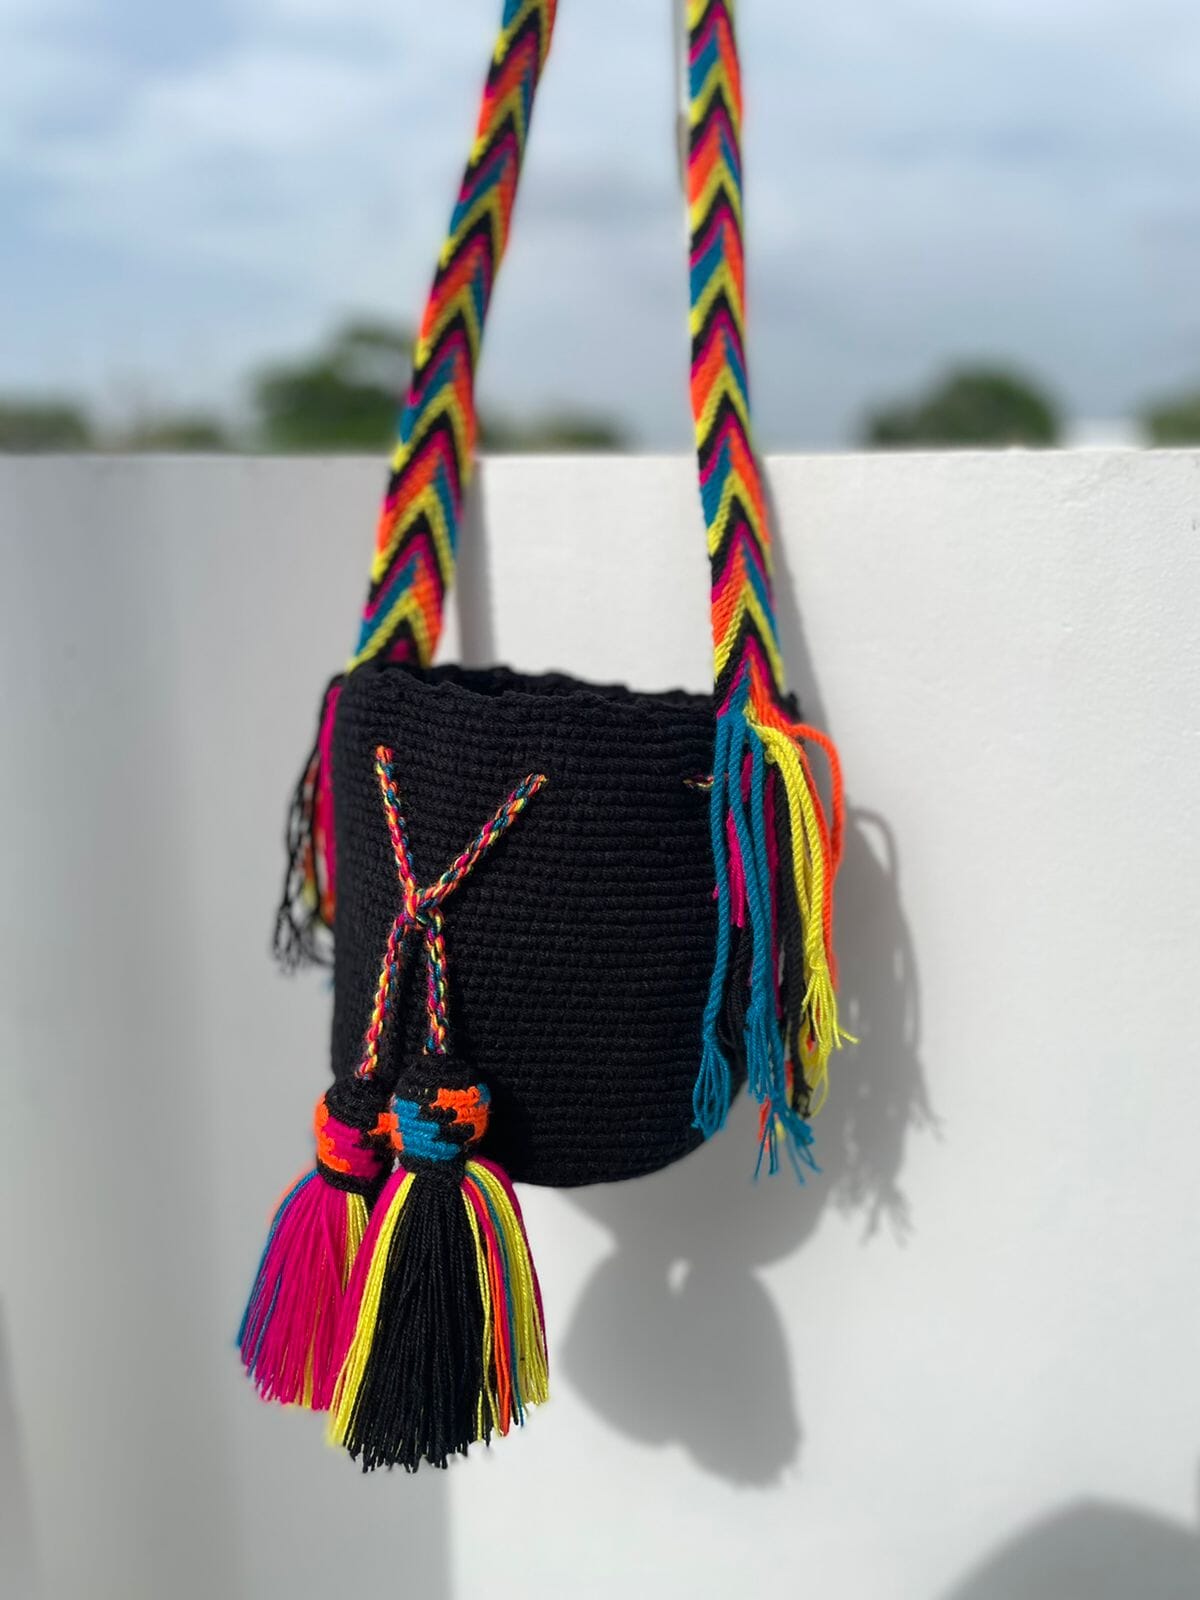 Black Beach Bag for summer vacation | Small Cute Bag for girls | Colorful 4U